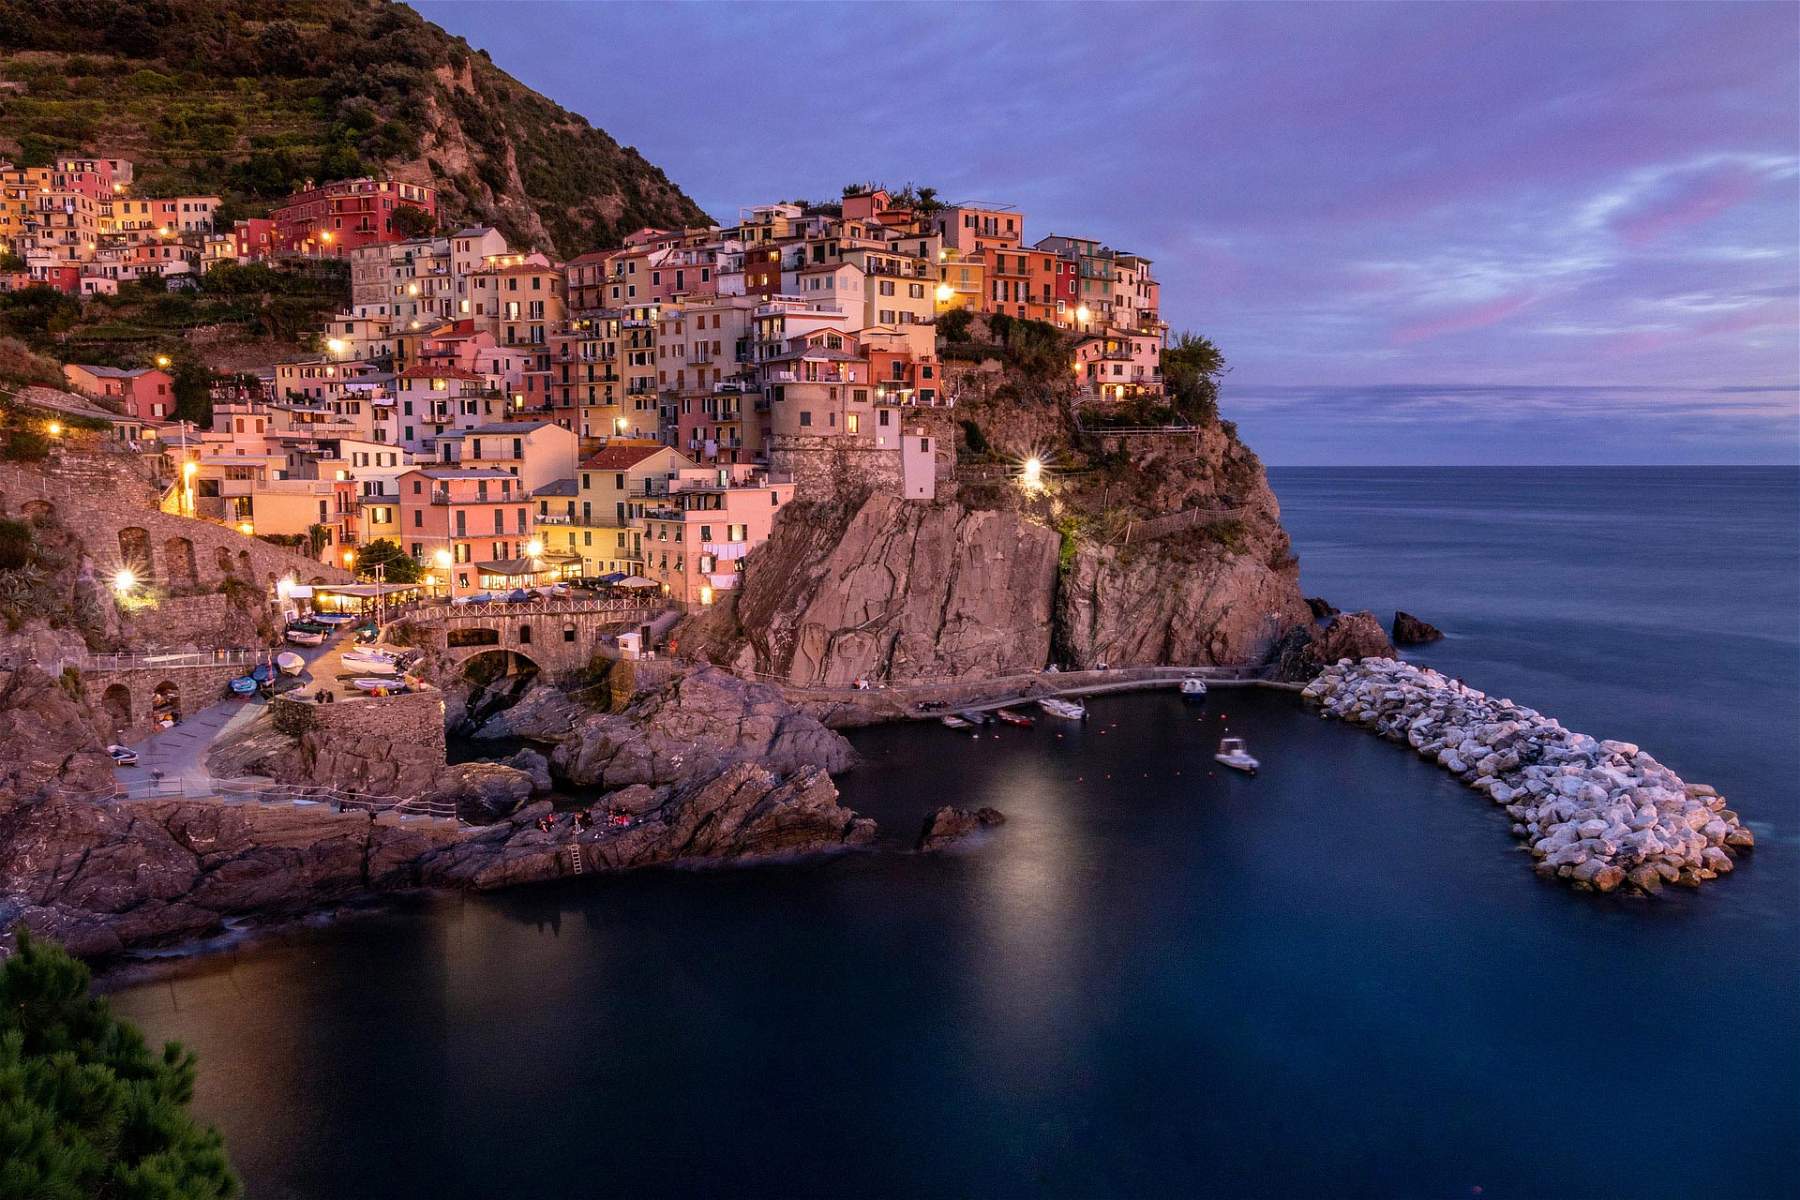 Here are the 20 most spectacular villages in Europe according to Jetcost. Three are Italian